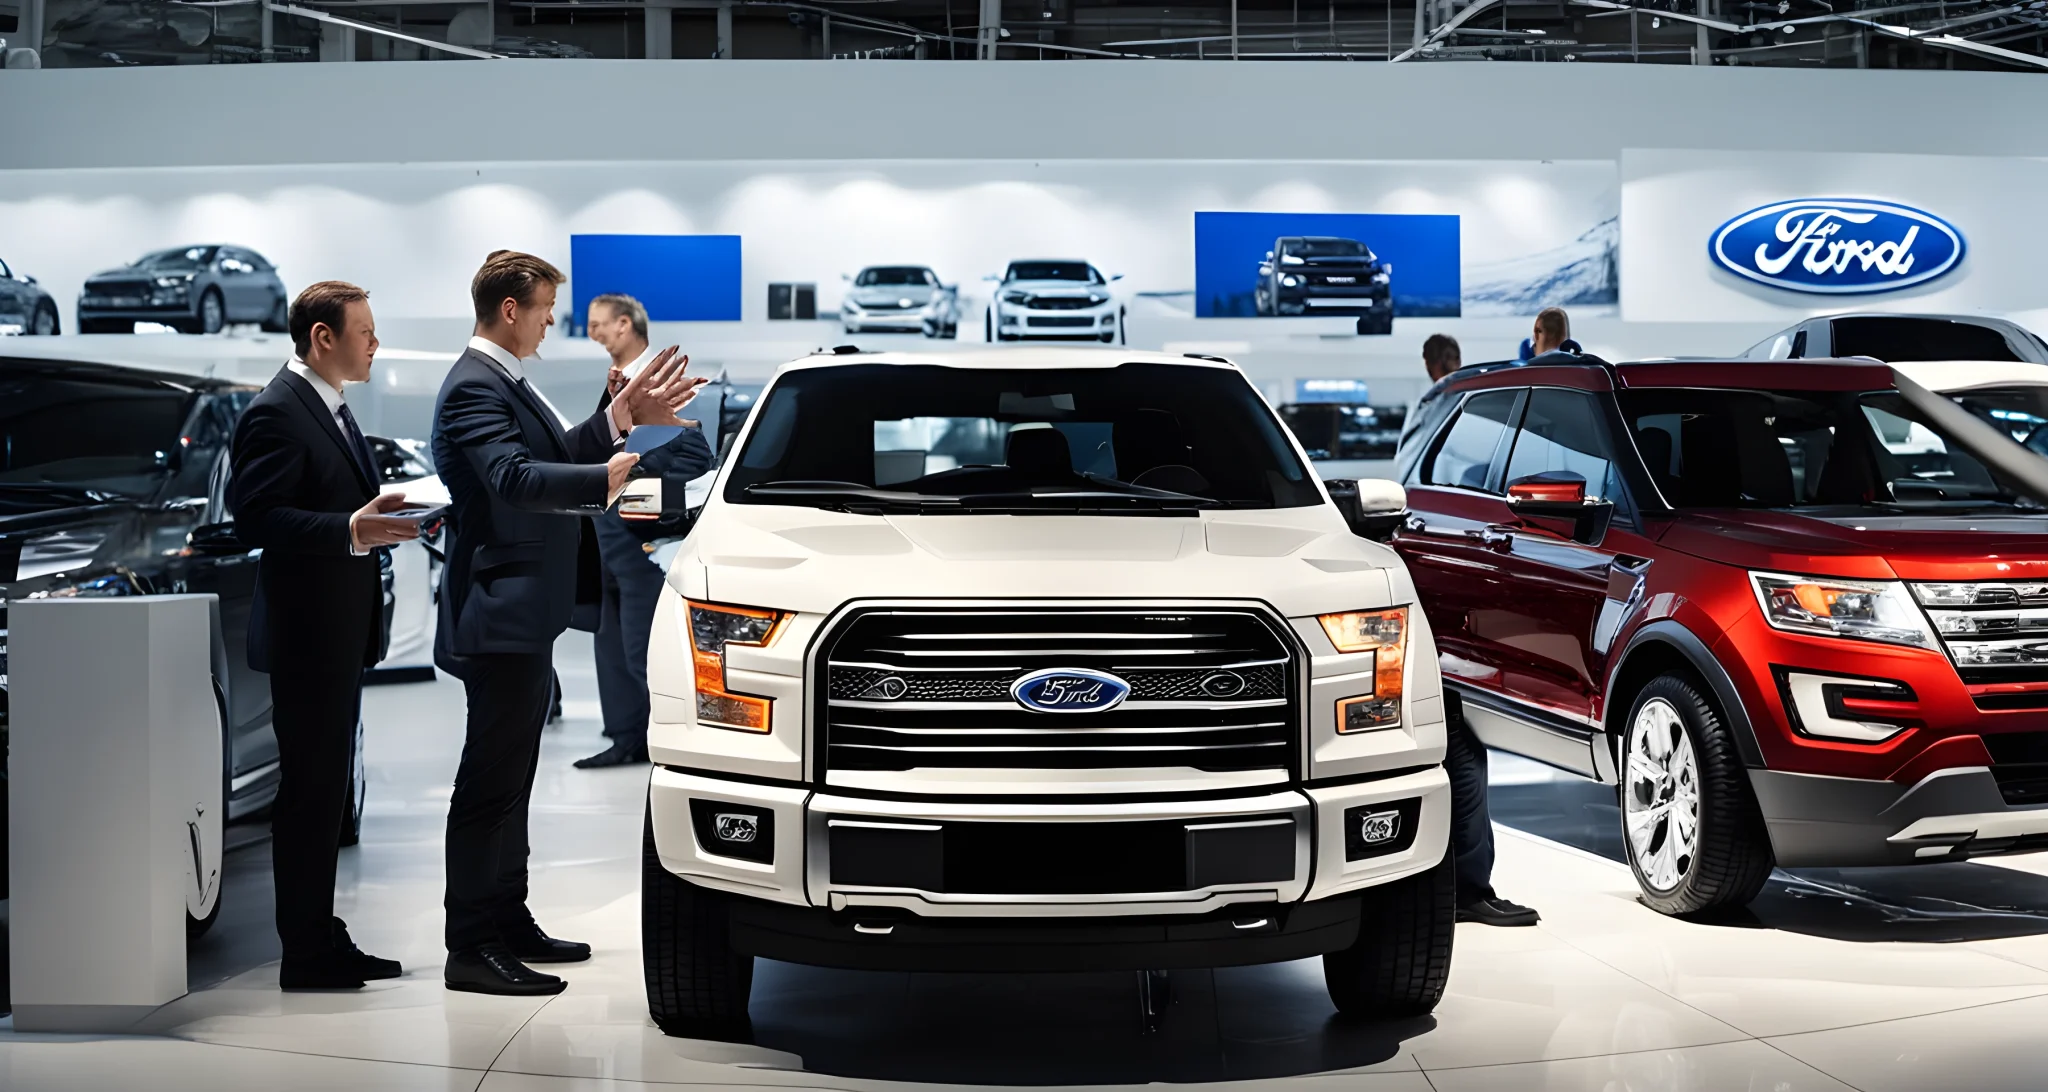 In the image, there is a new Ford vehicle surrounded by a dealer and a customer negotiating the price.